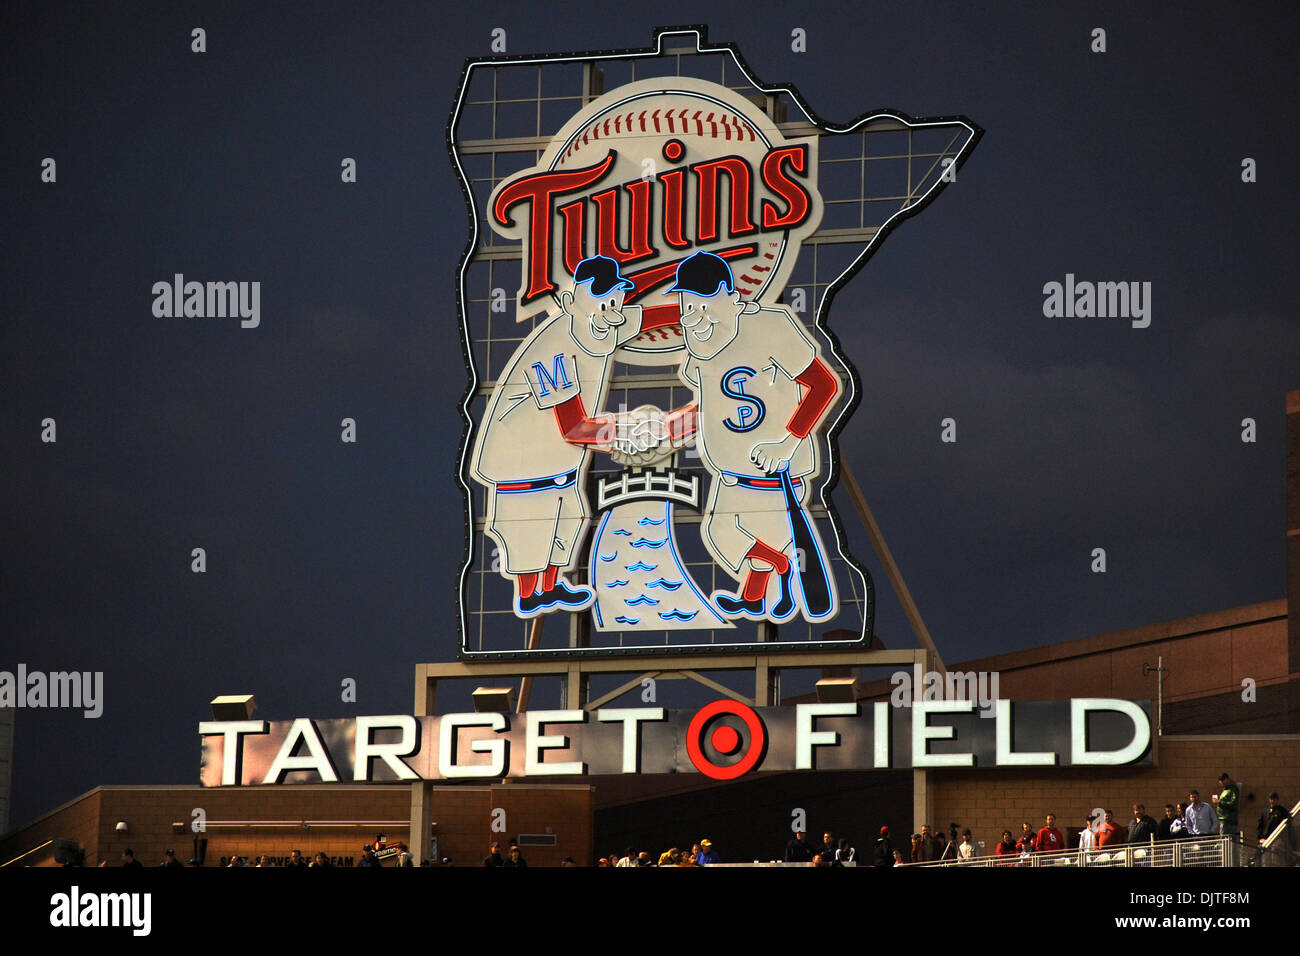 Center Field Sign at Target Field Editorial Photo - Image of minneapolis,  center: 53876211